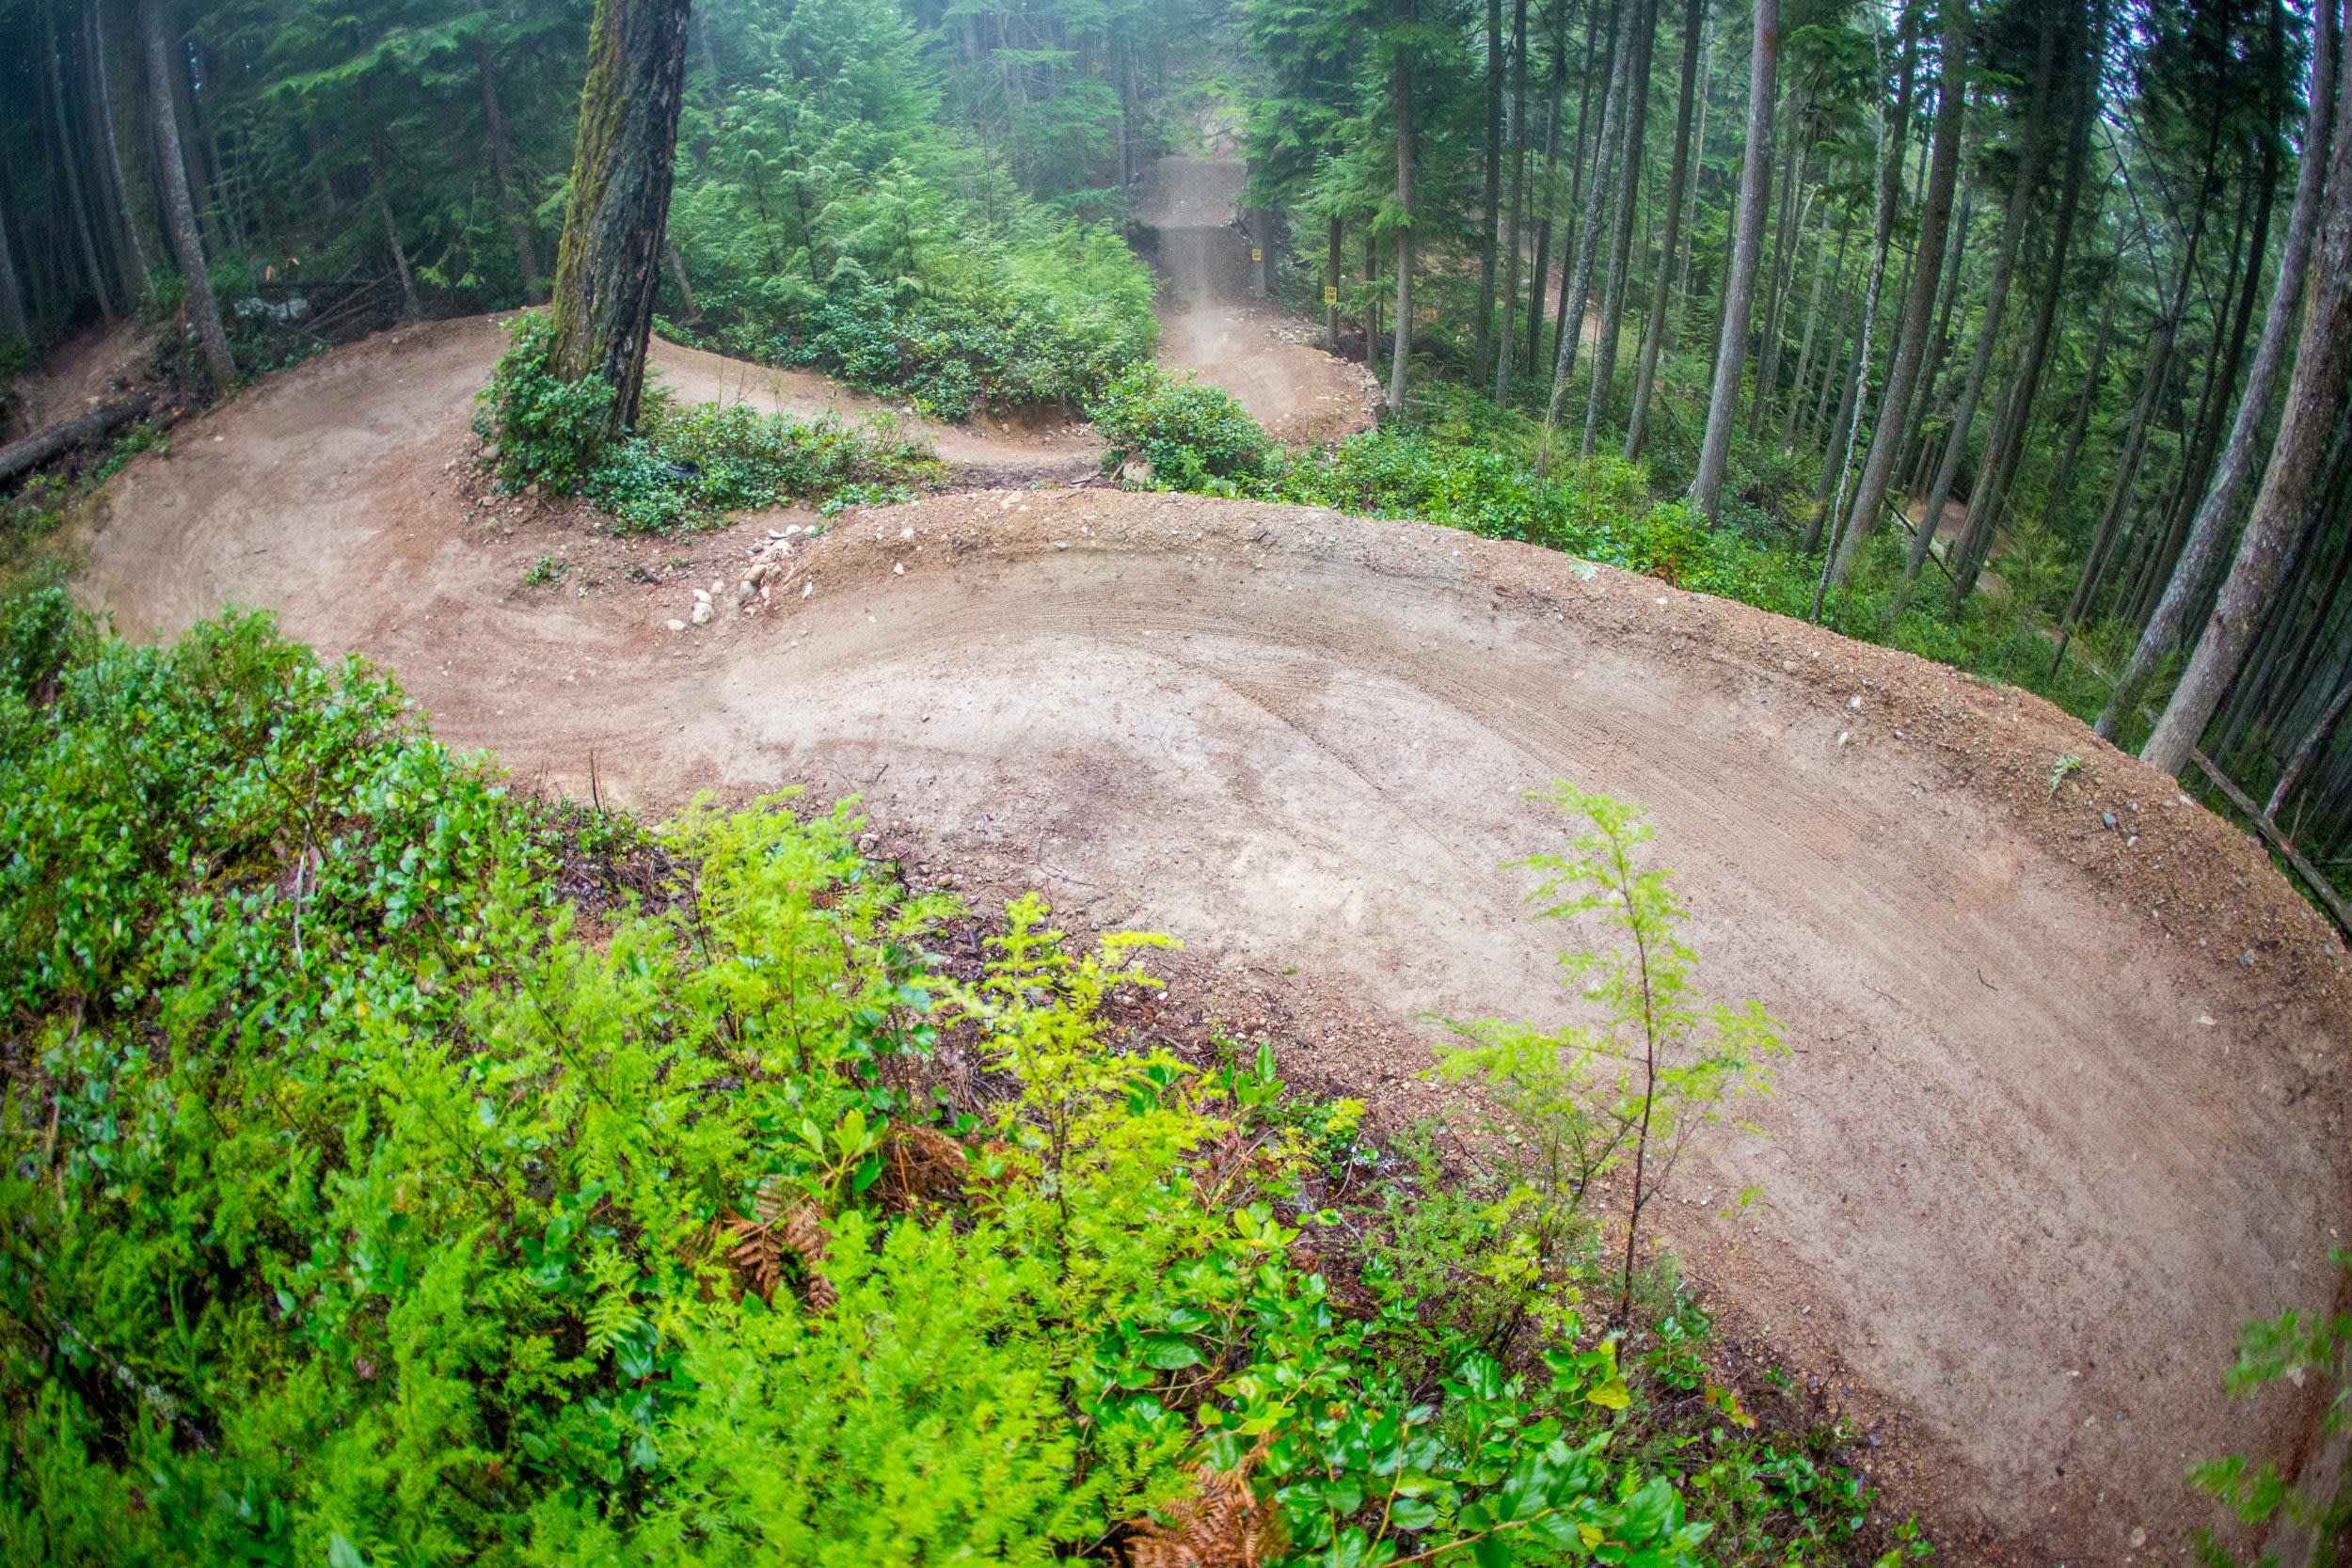 Coast Gravity Park, BC: The best bike park in Canada